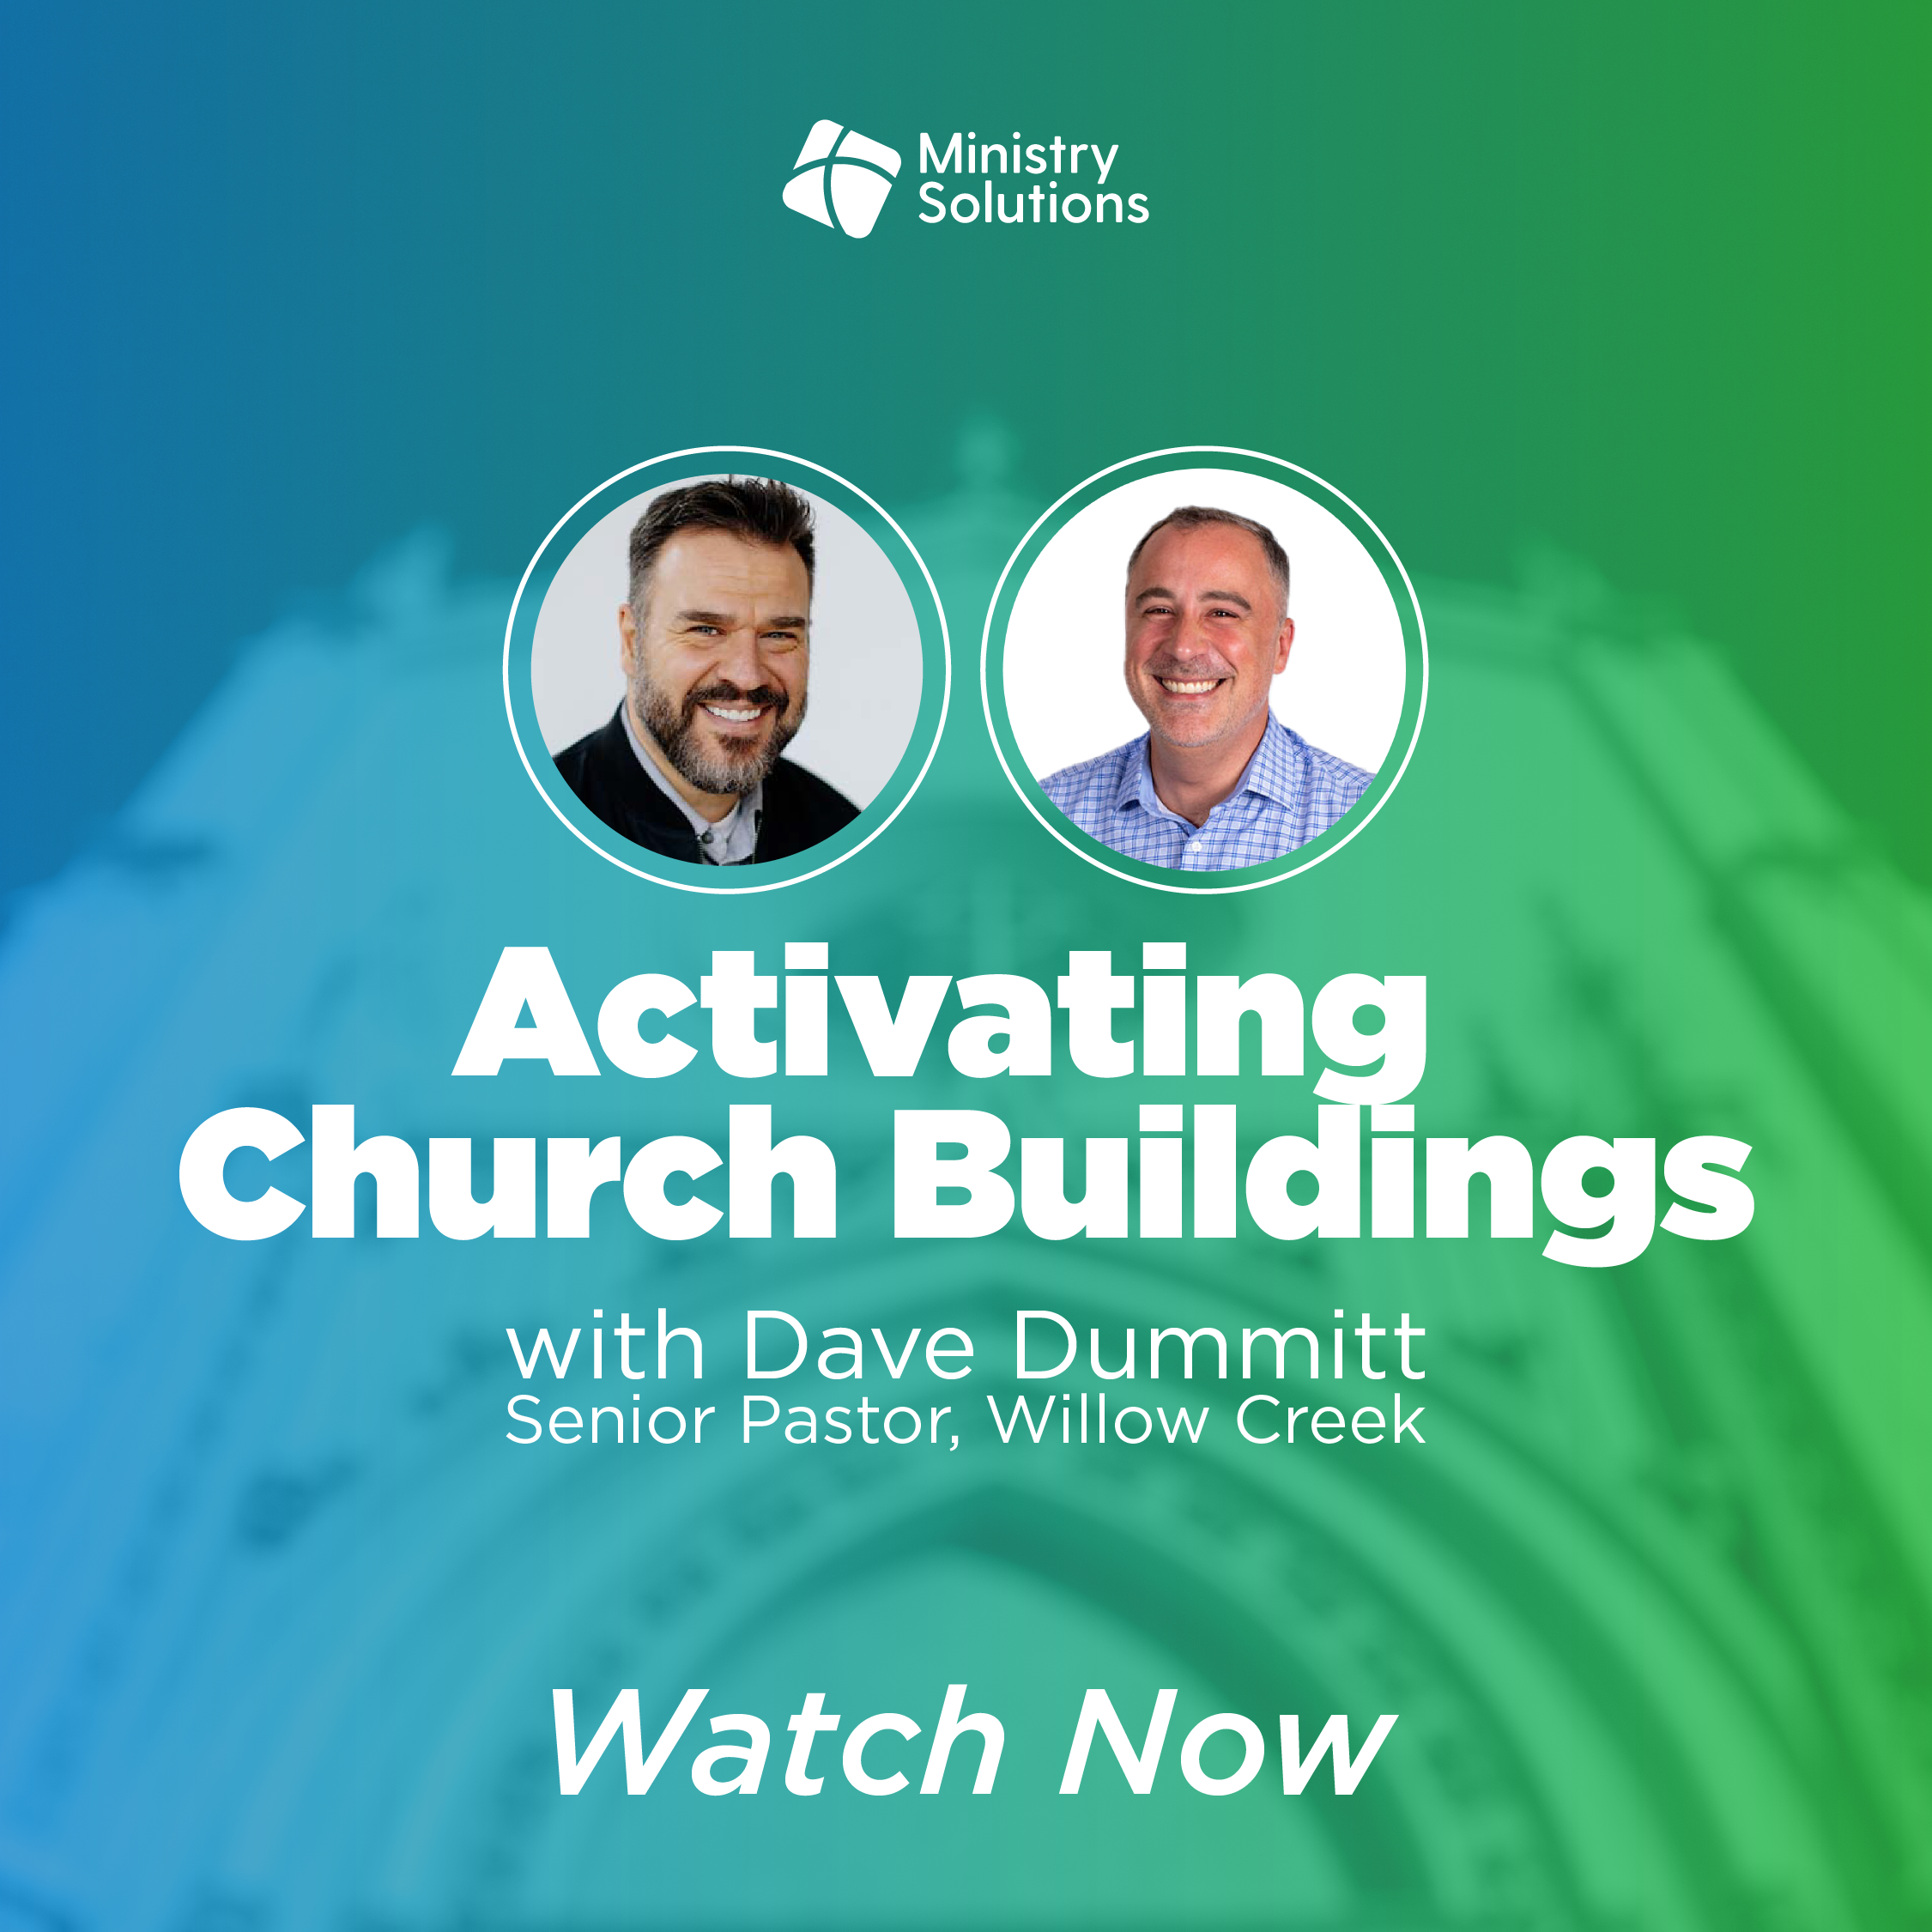 Activating Buildings with Dave Dummitt